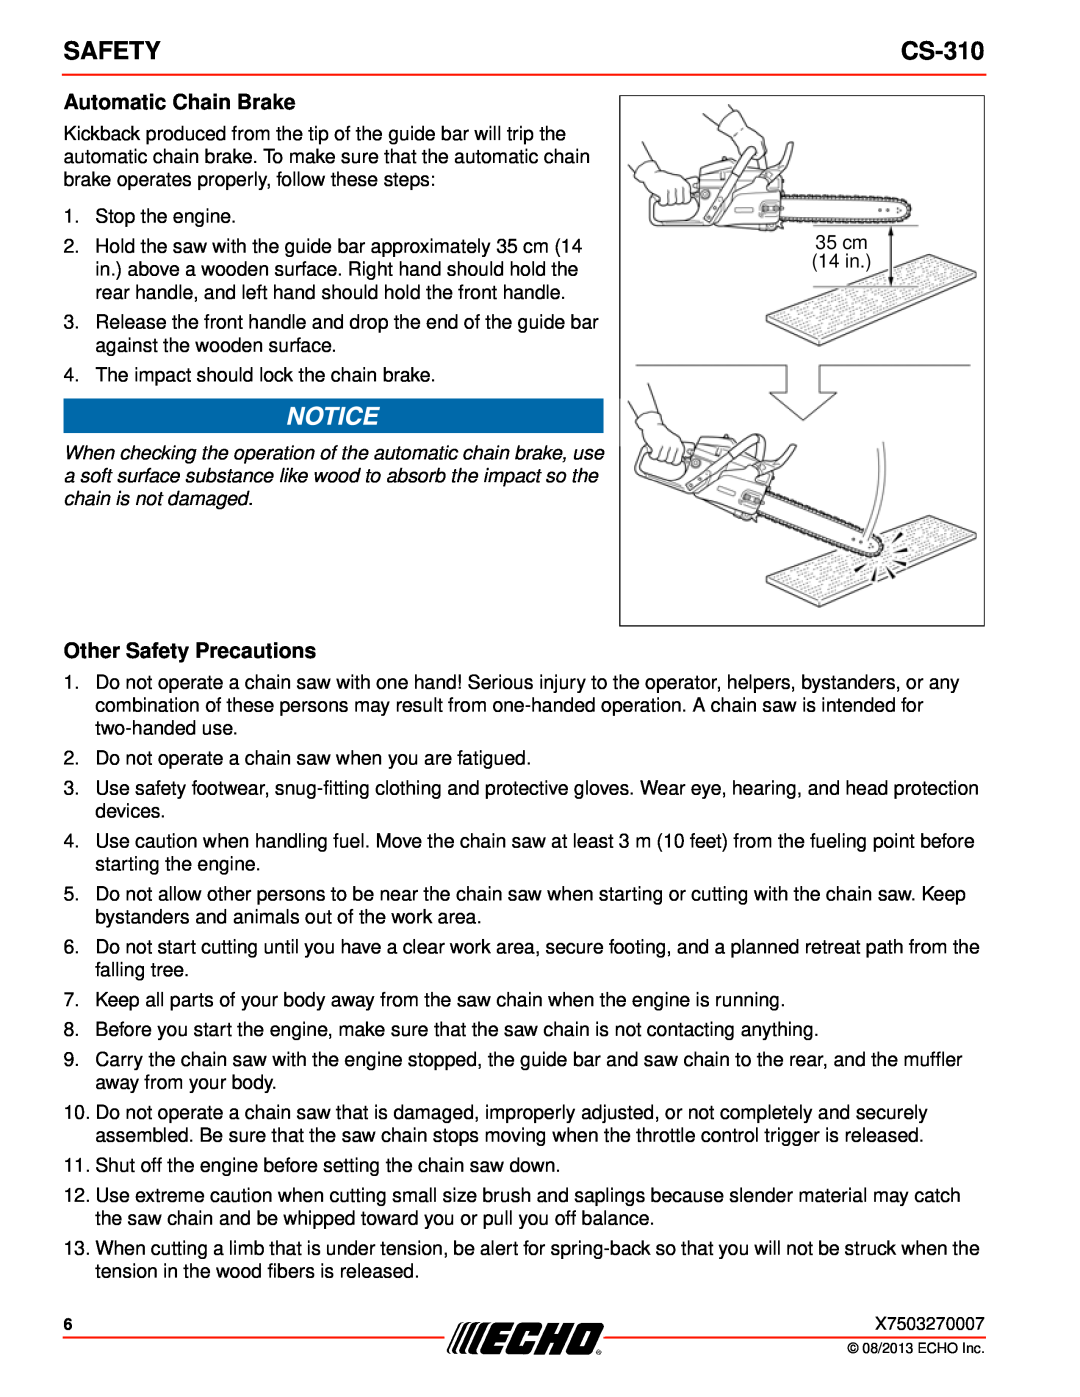 Echo CS-310 instruction manual Automatic Chain Brake, Other Safety Precautions 